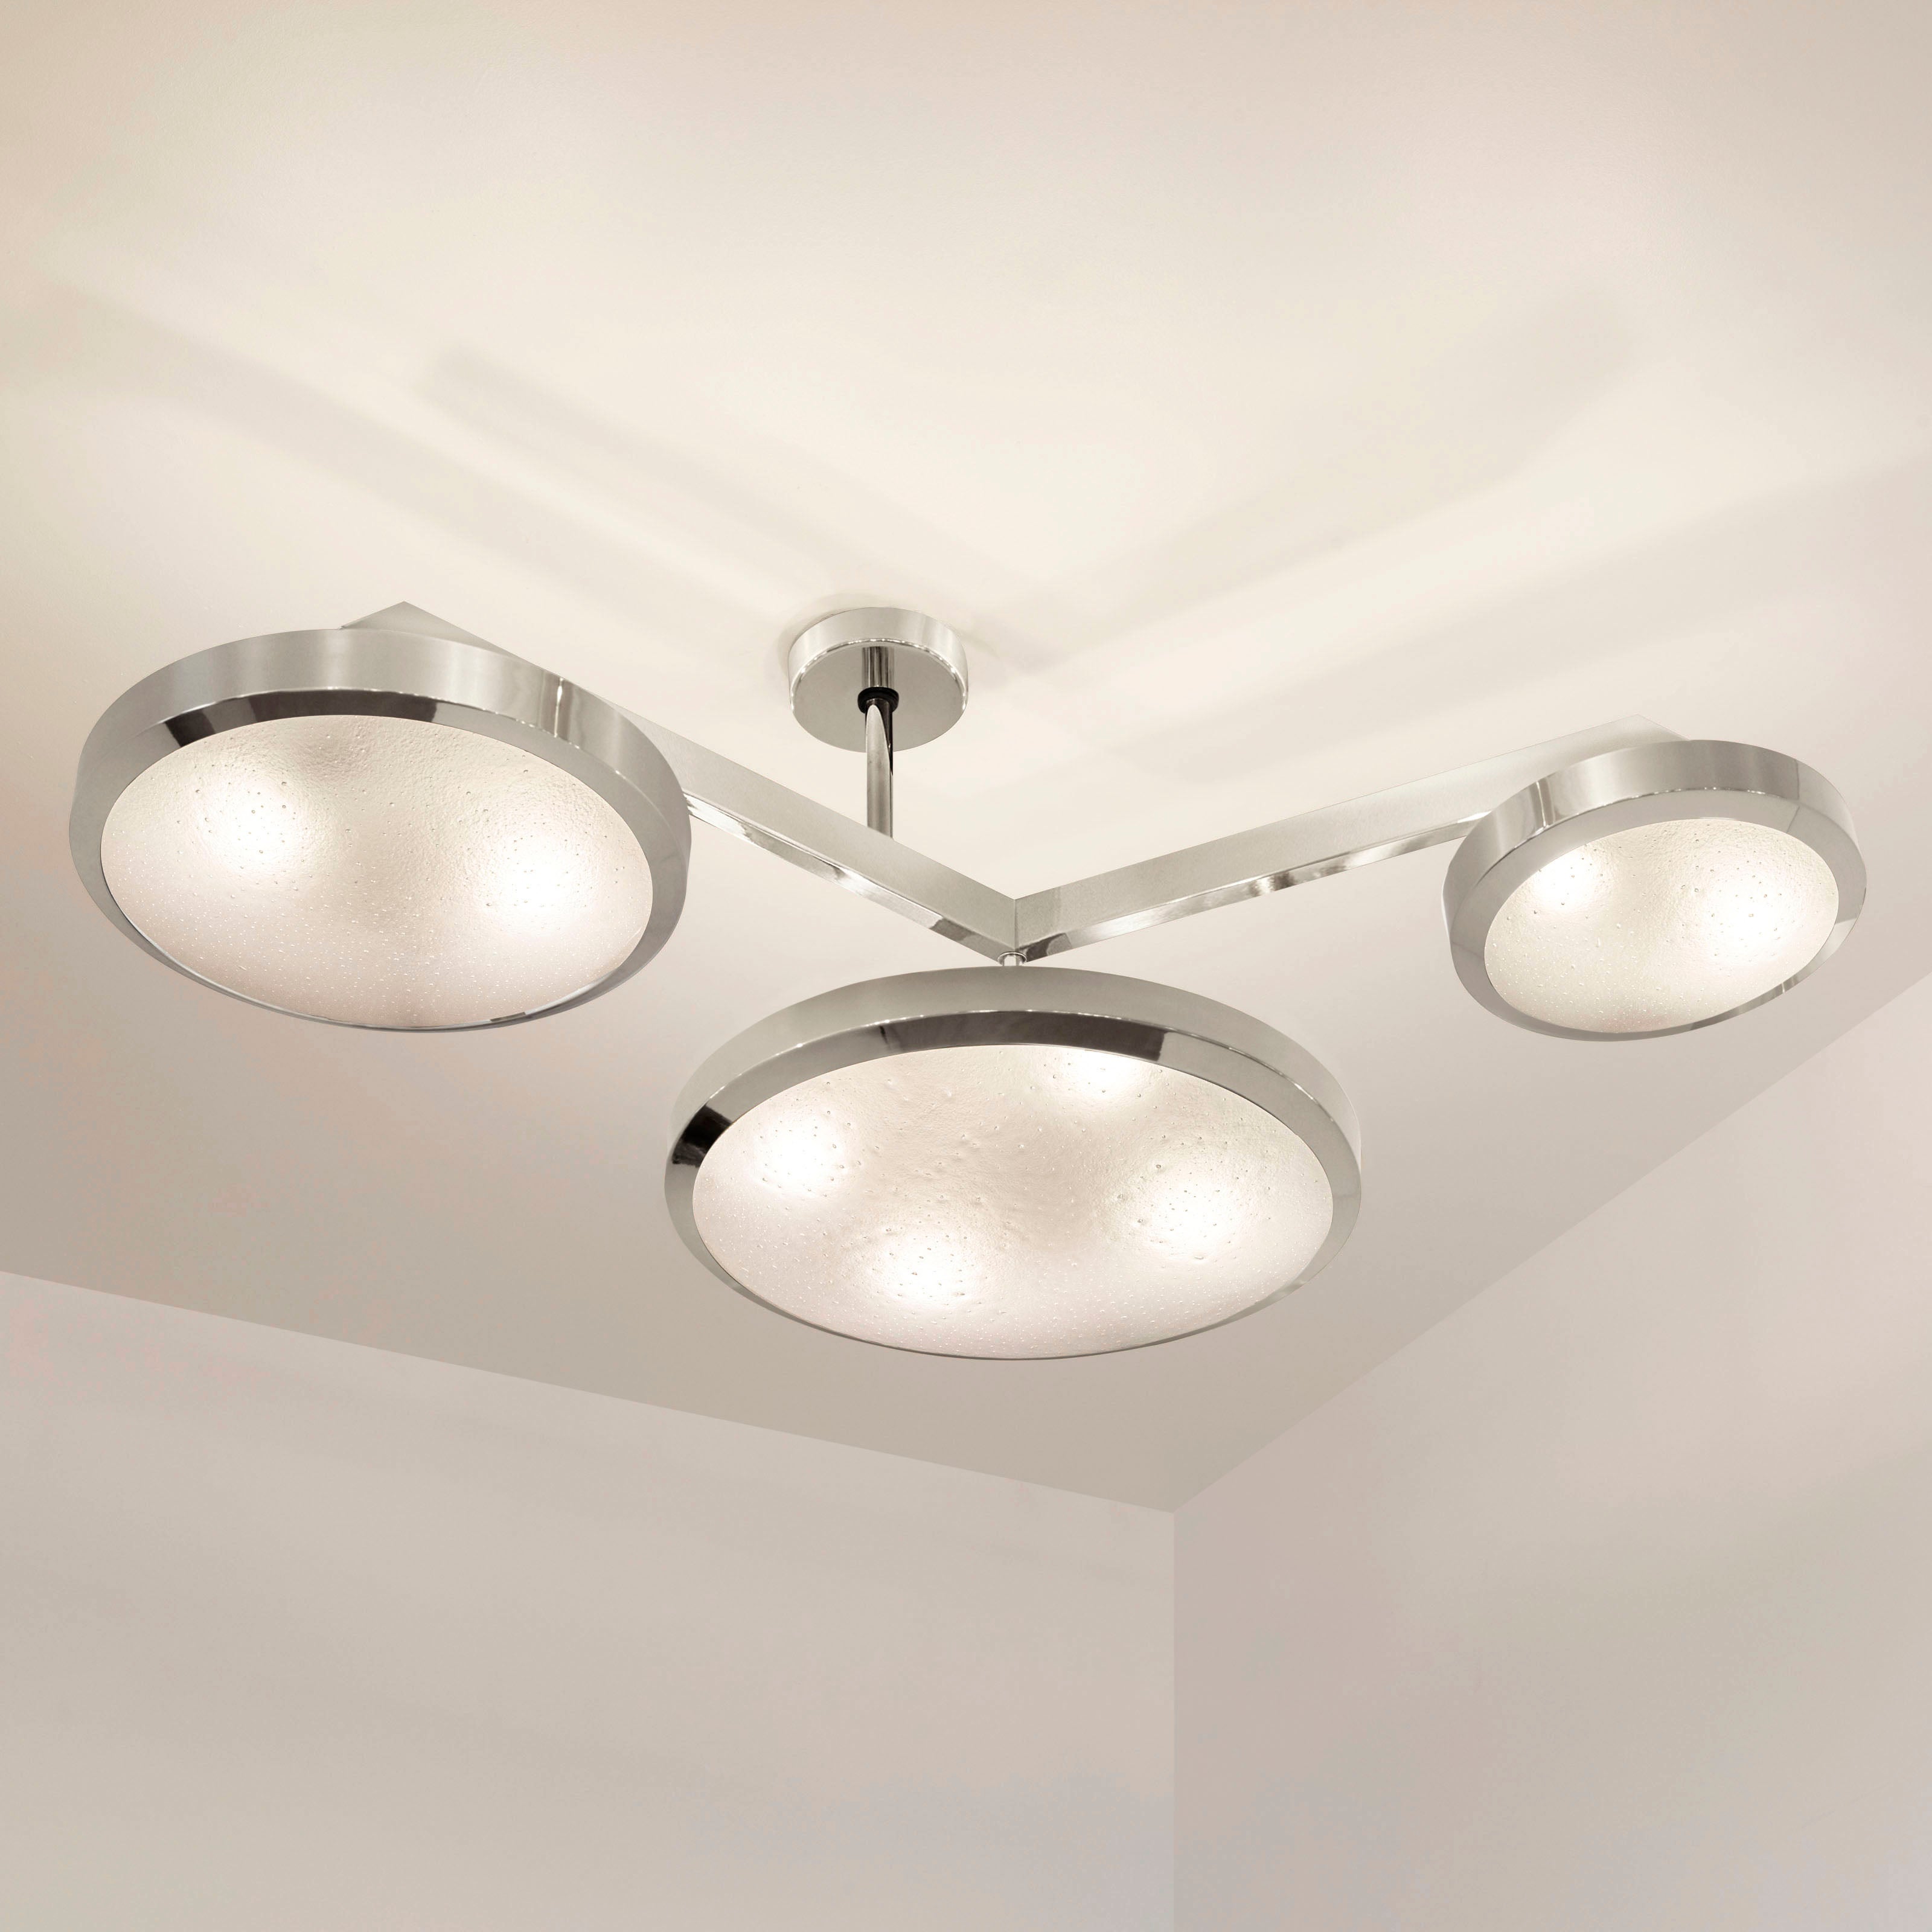 Zeta Ceiling Light by Gaspare Asaro - Polished Nickel Finish For Sale